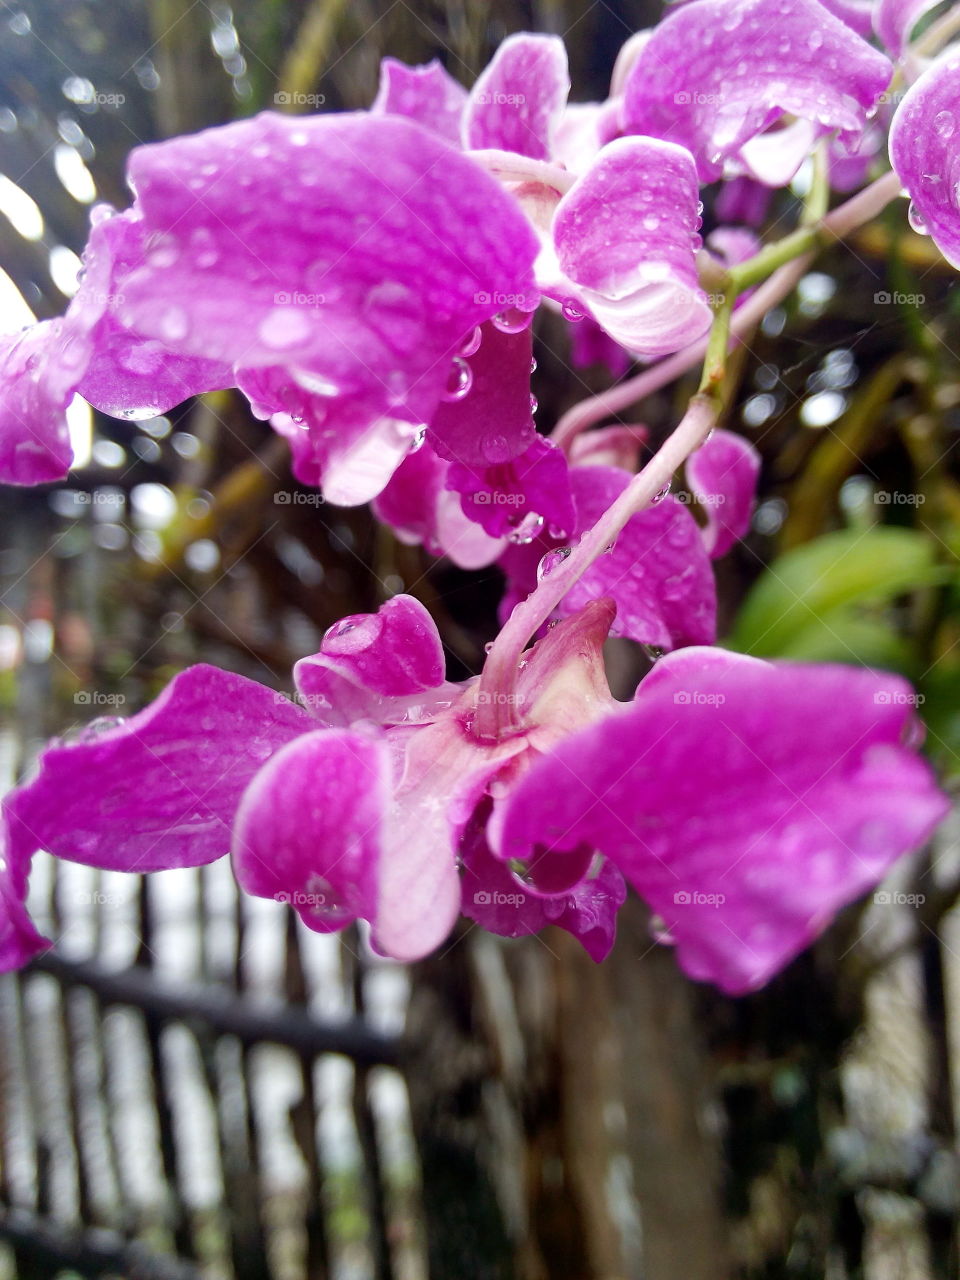 You are so stunning and beautiful in a rainy season. My neighbors orchid plant.